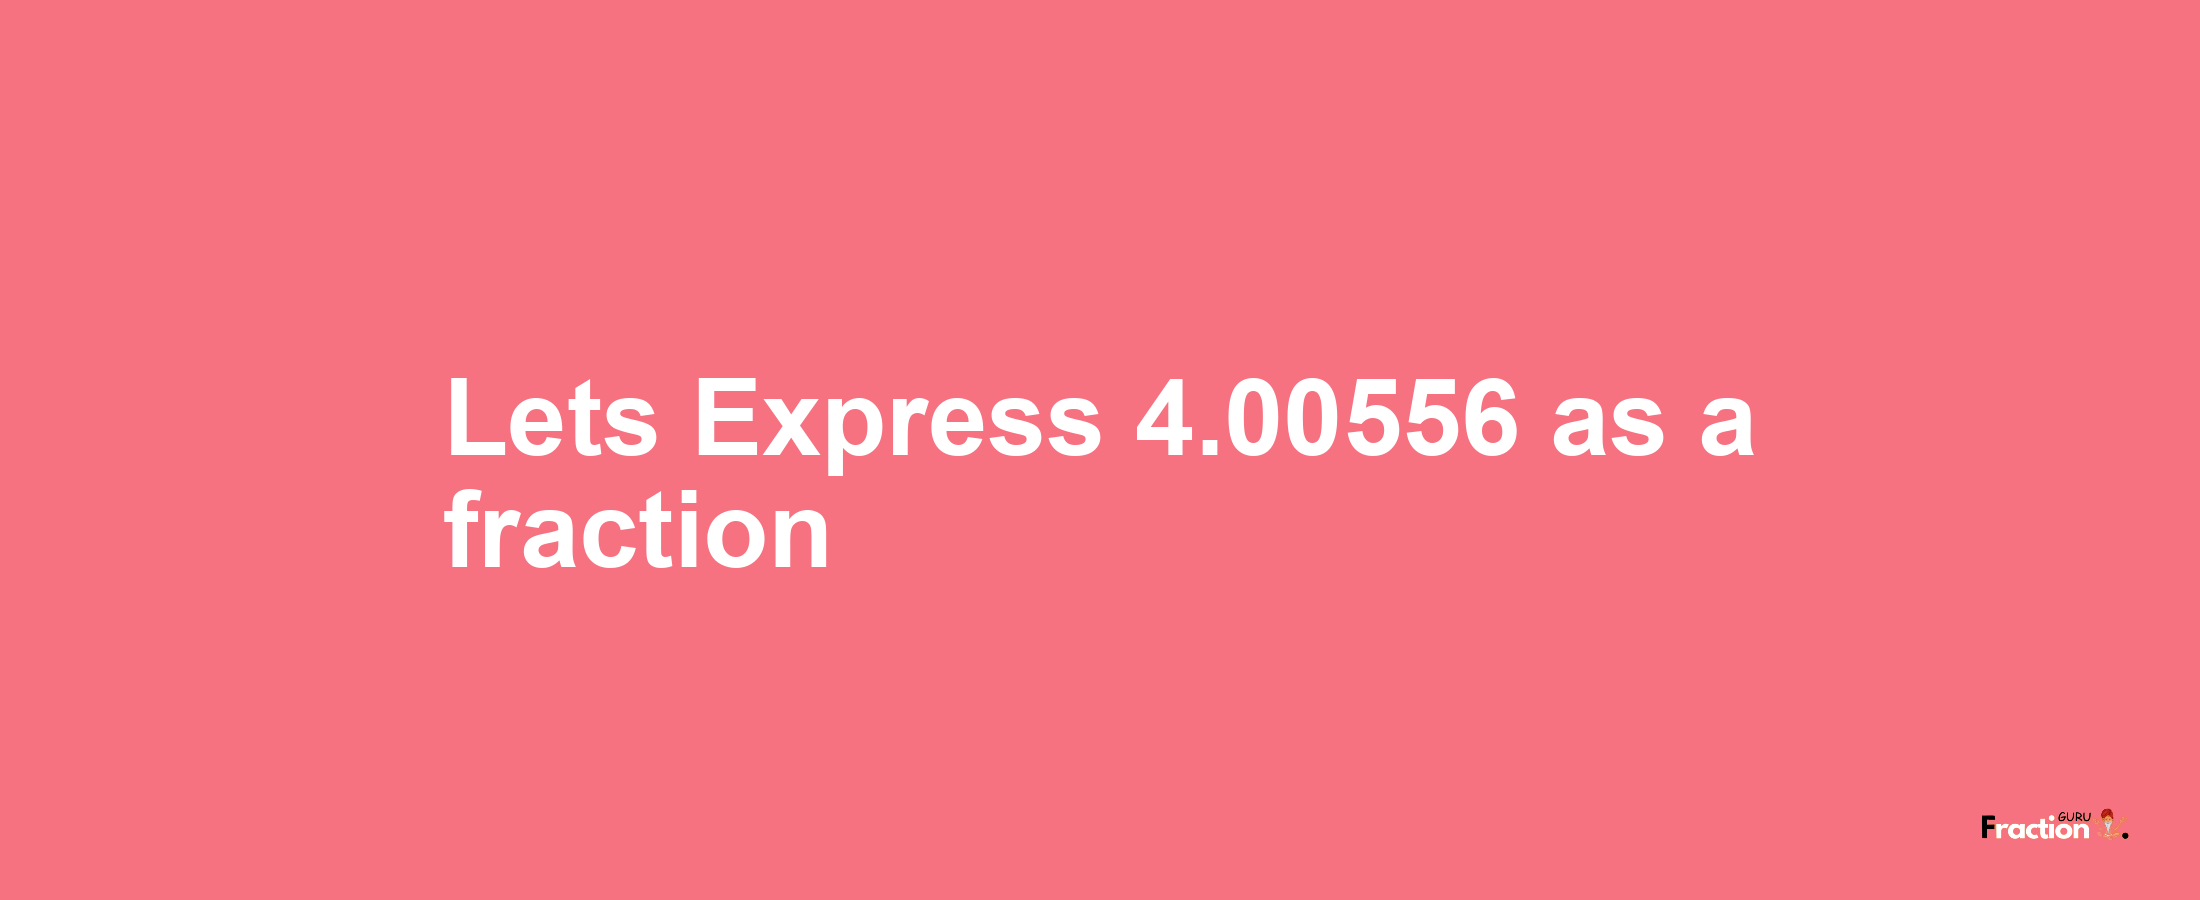 Lets Express 4.00556 as afraction